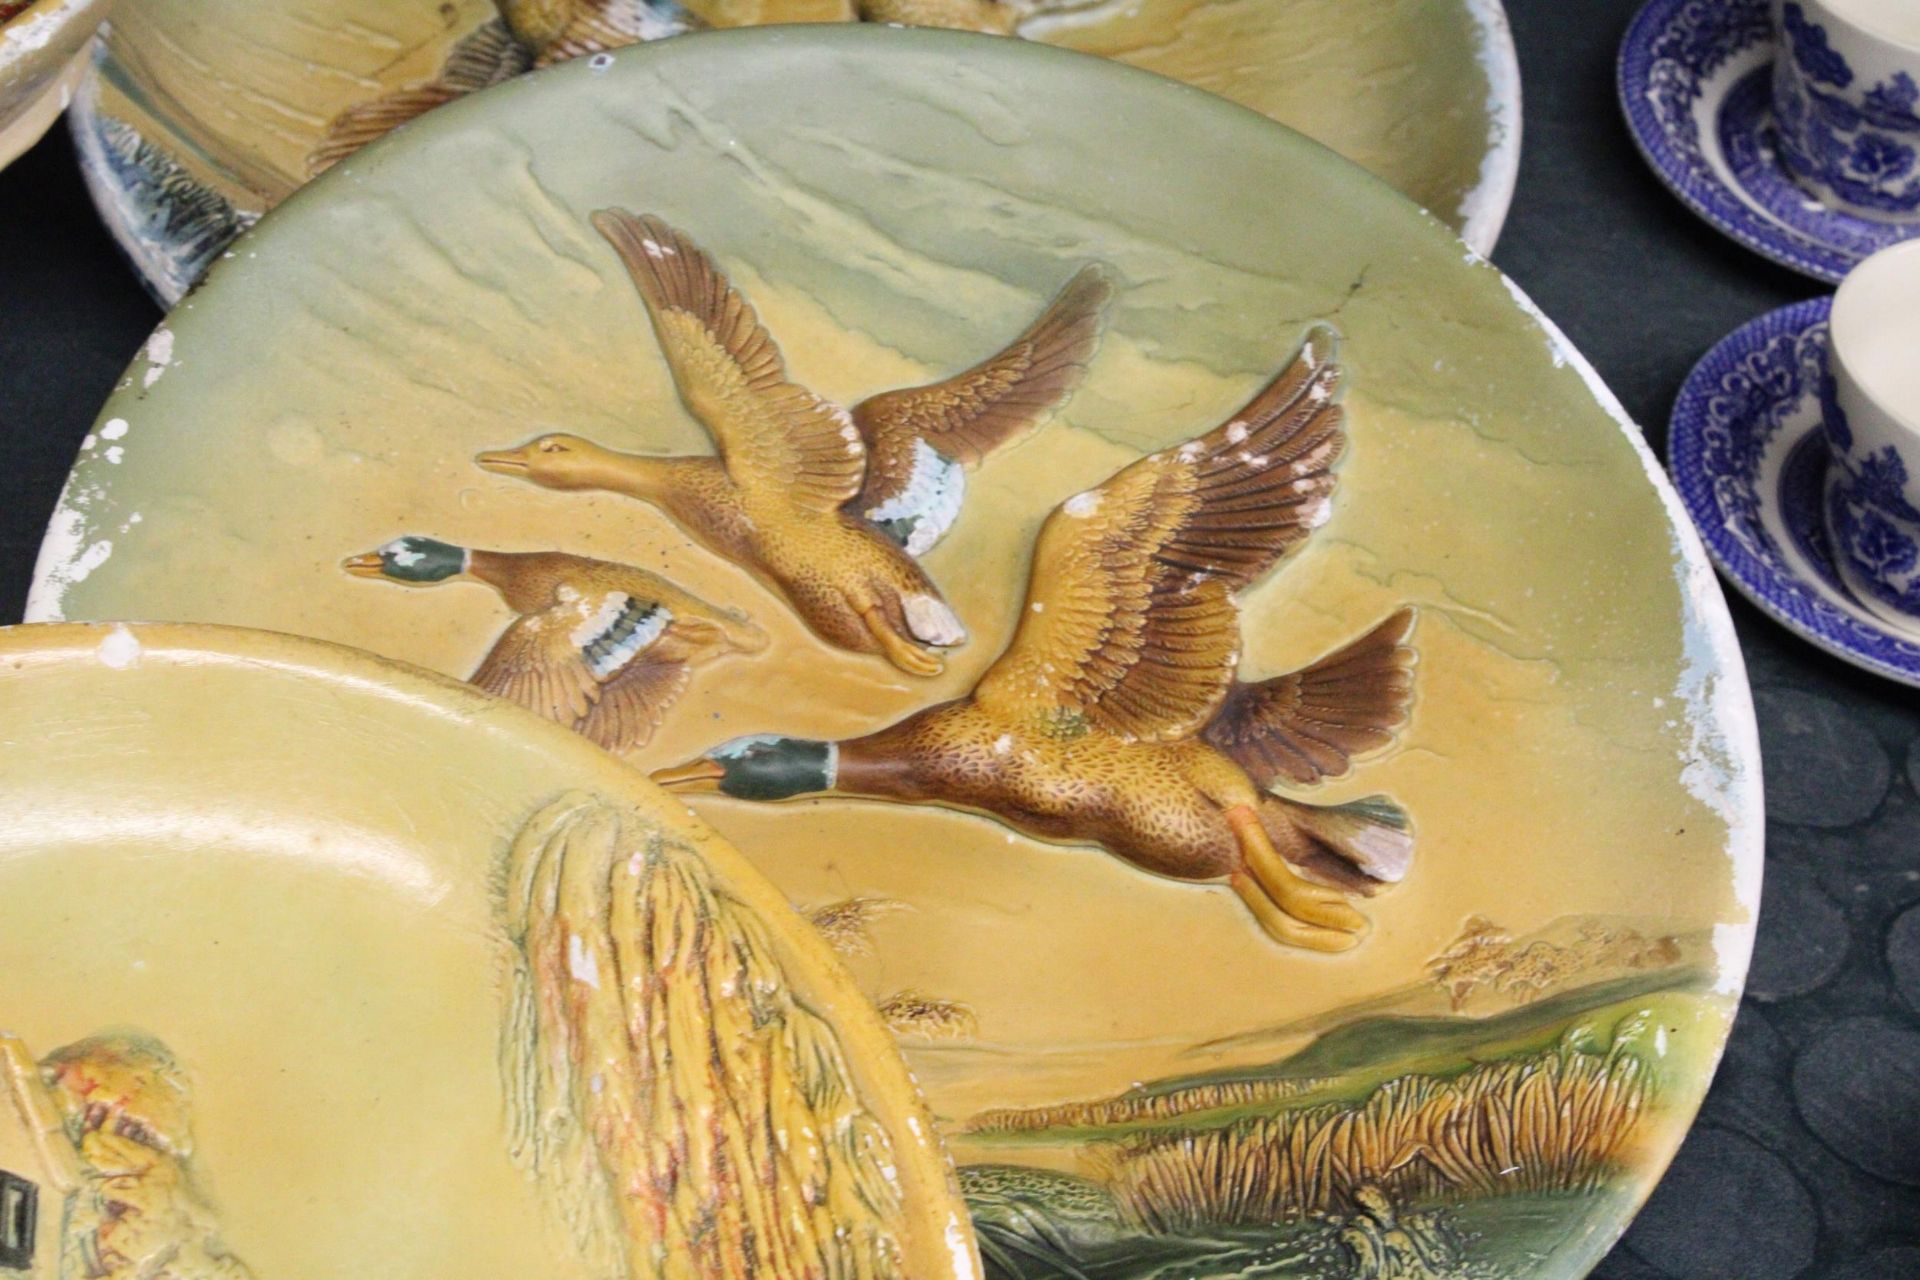 FIVE LARGE 3-D CHALKWARE VINTAGE PLATES WITH IMAGES OF HOUSES AND DUCKS - Image 3 of 6